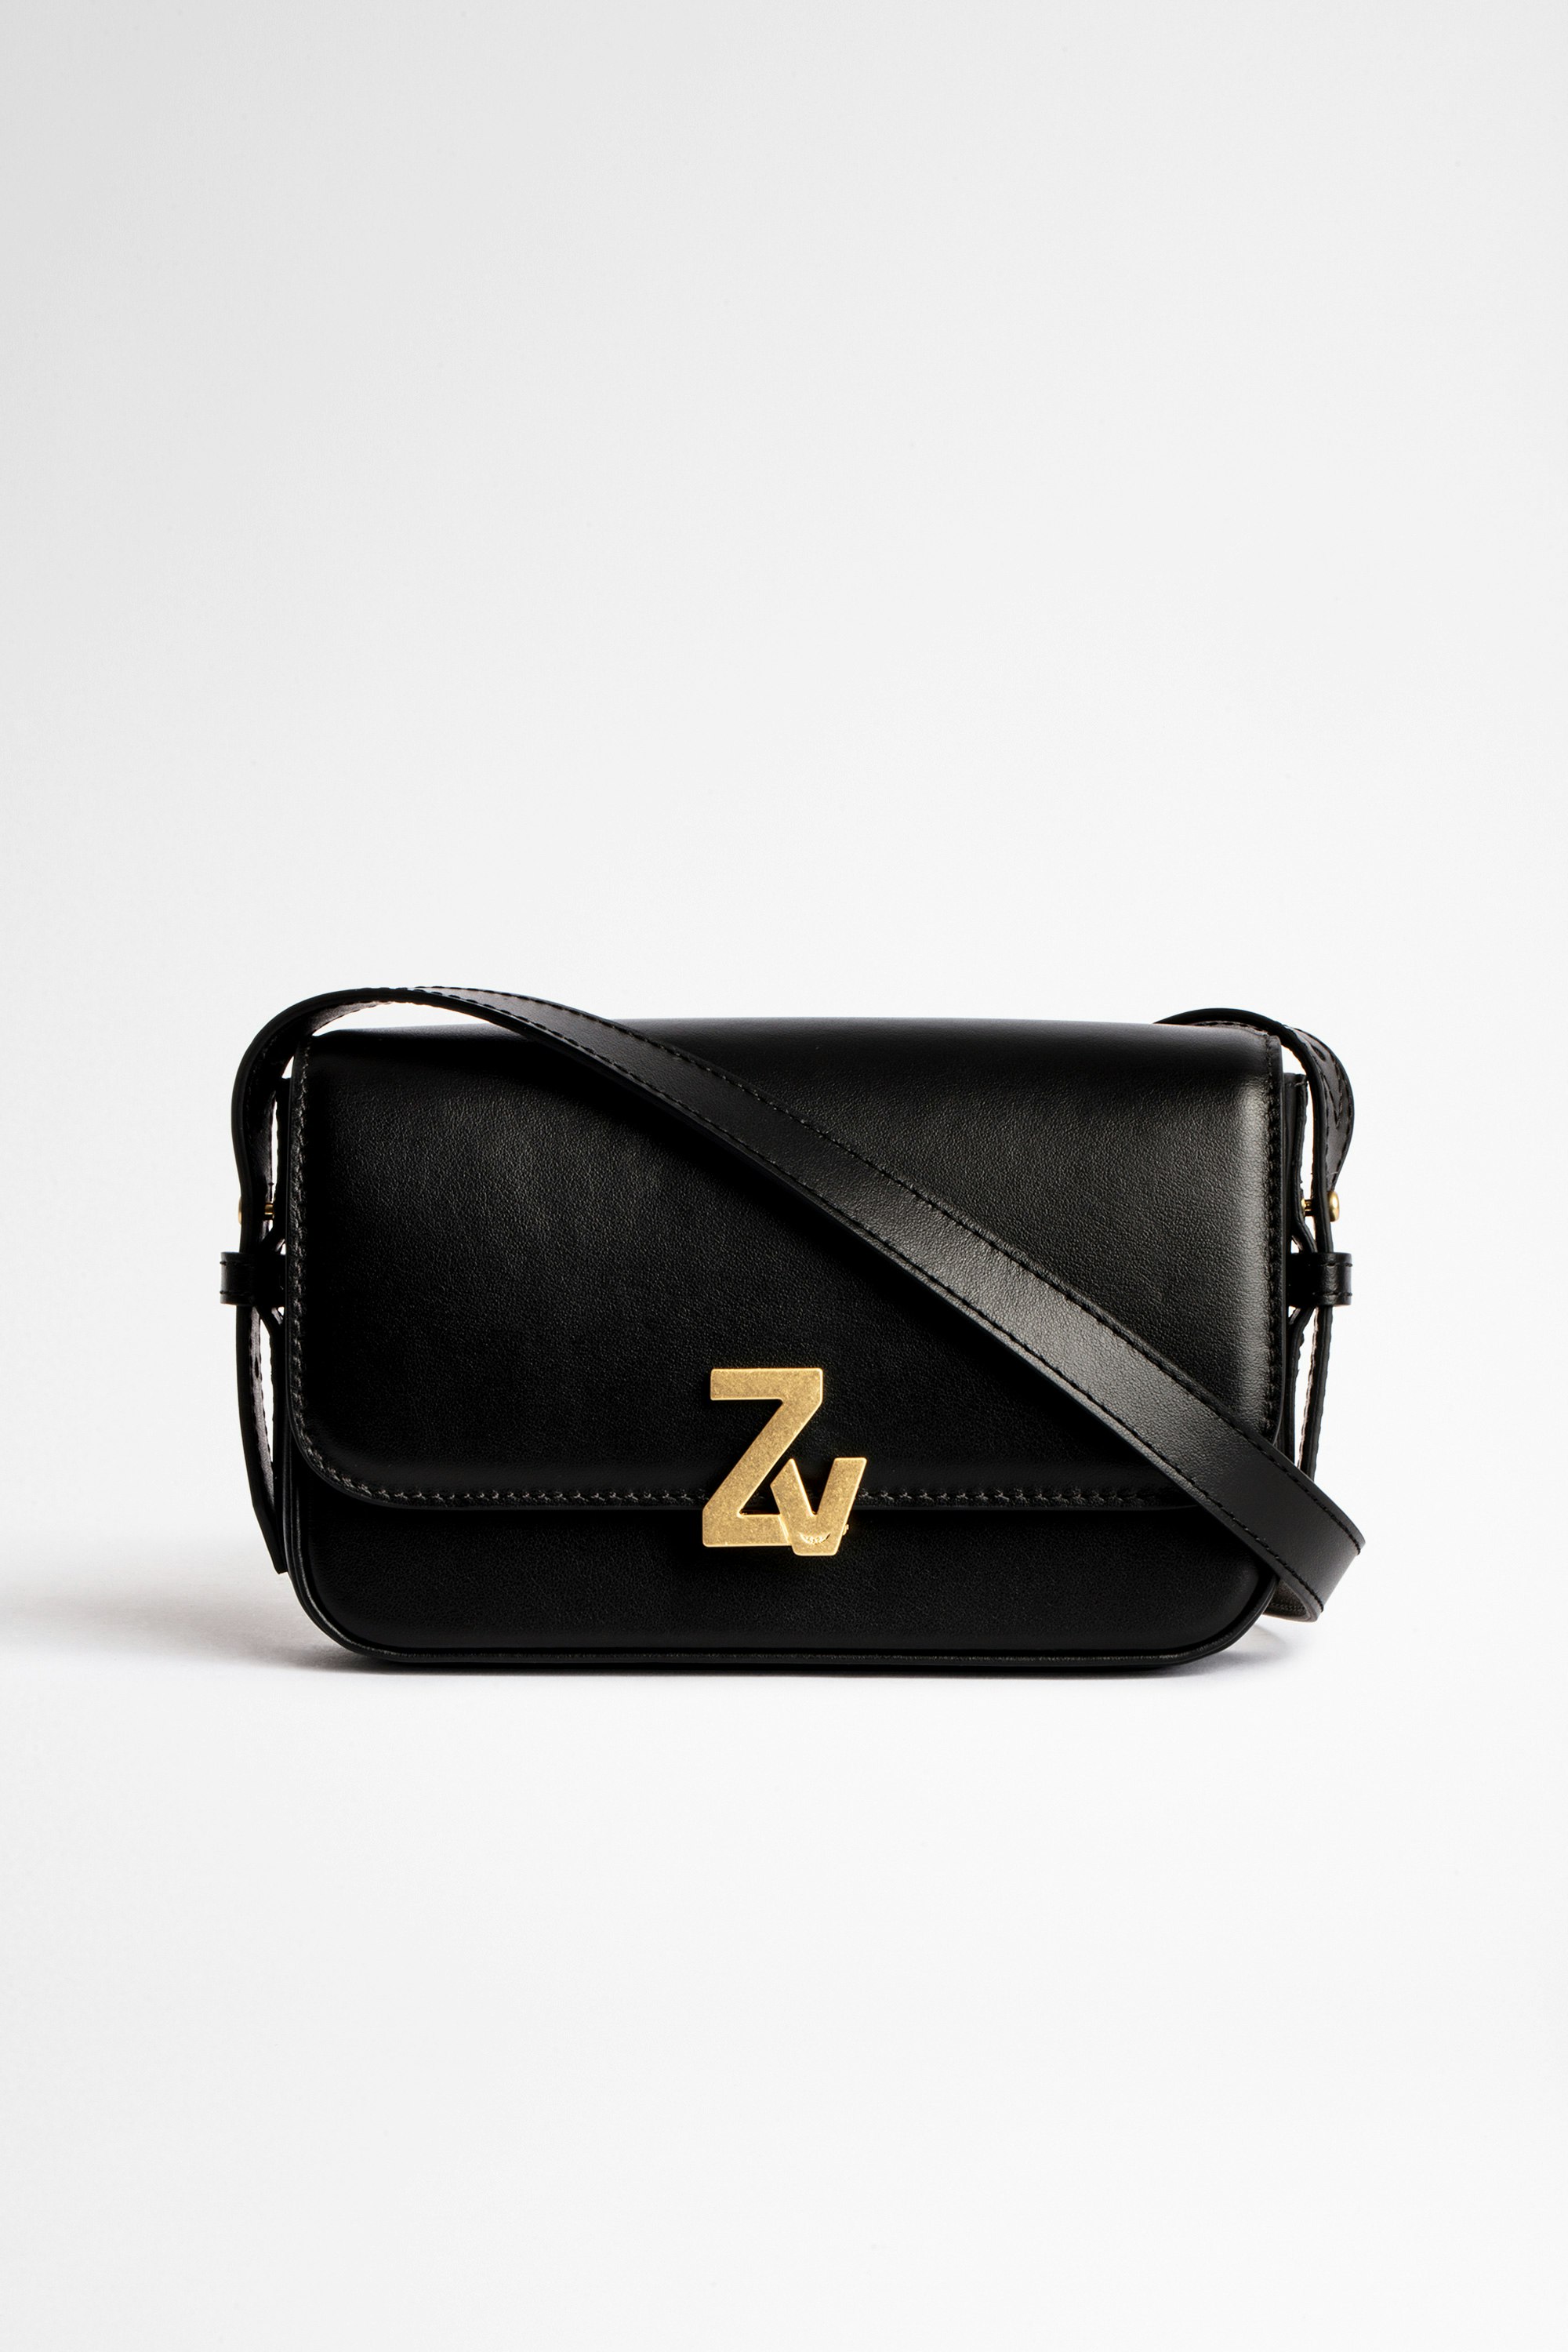 Le Mini ZV Initiale Bag Zadig&Voltaire Women’s ZV Initiale Le Mini bag in black smooth leather